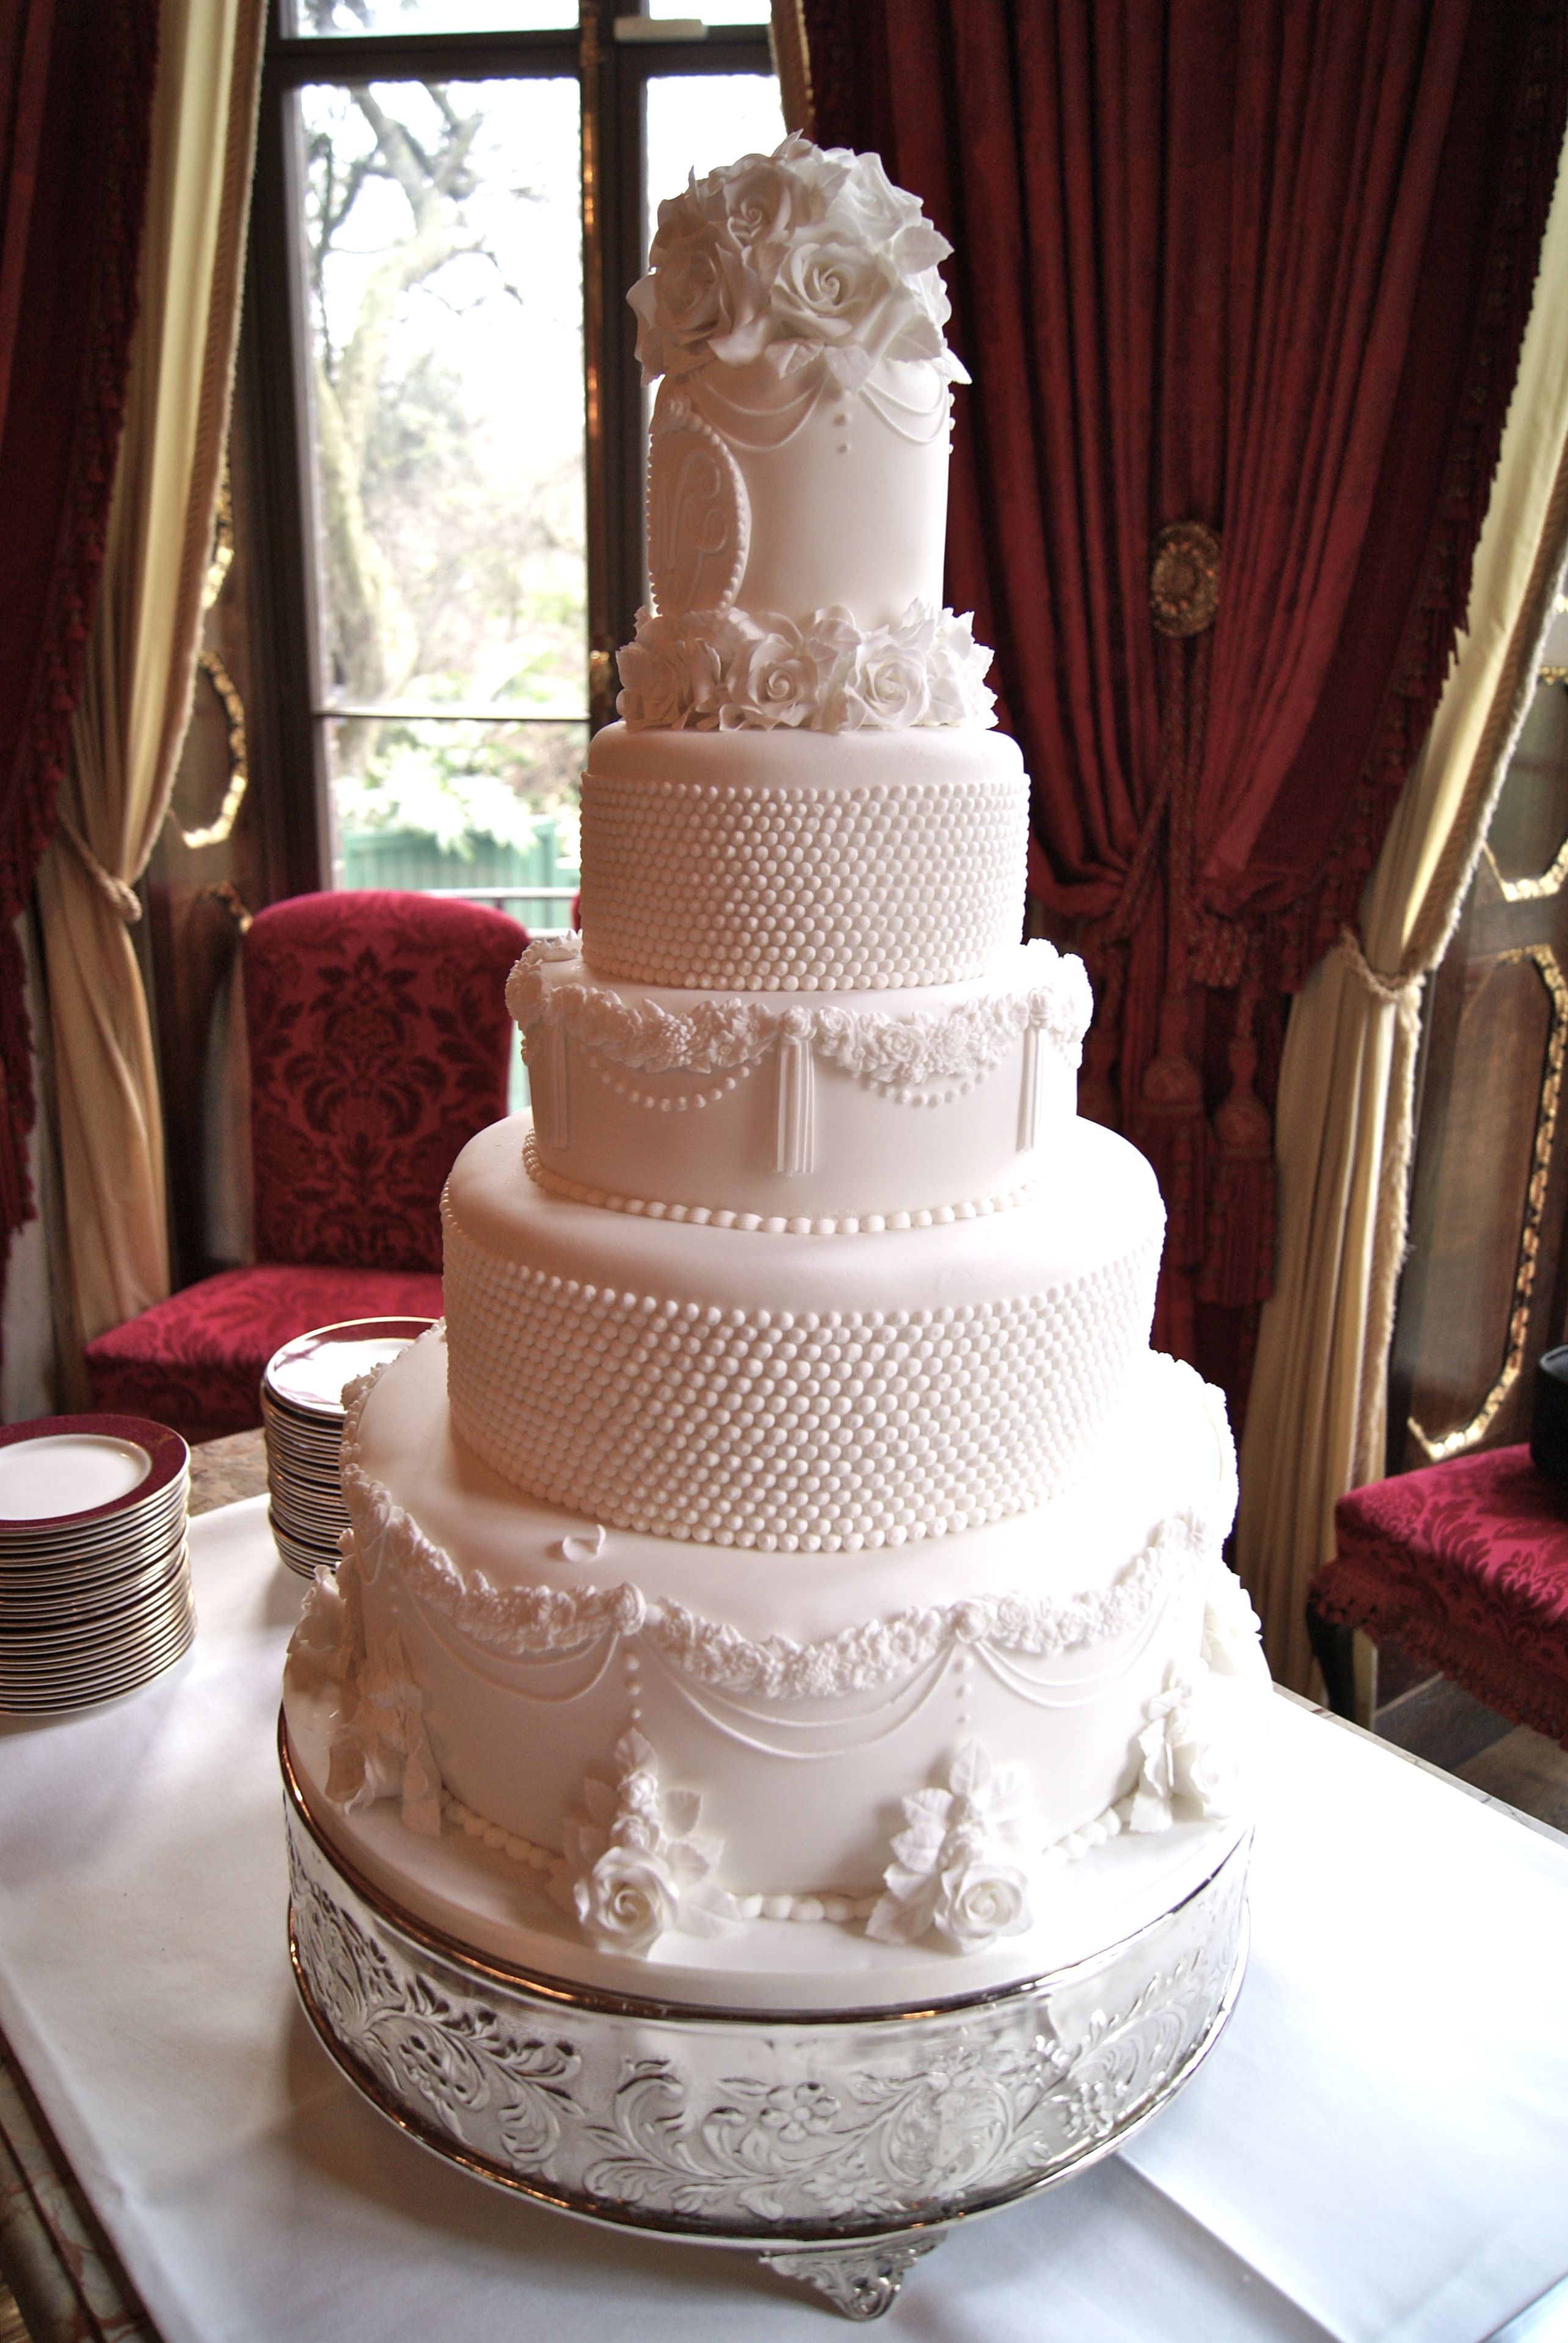 Wedding Cake Designs And Prices - Allope #Recipes